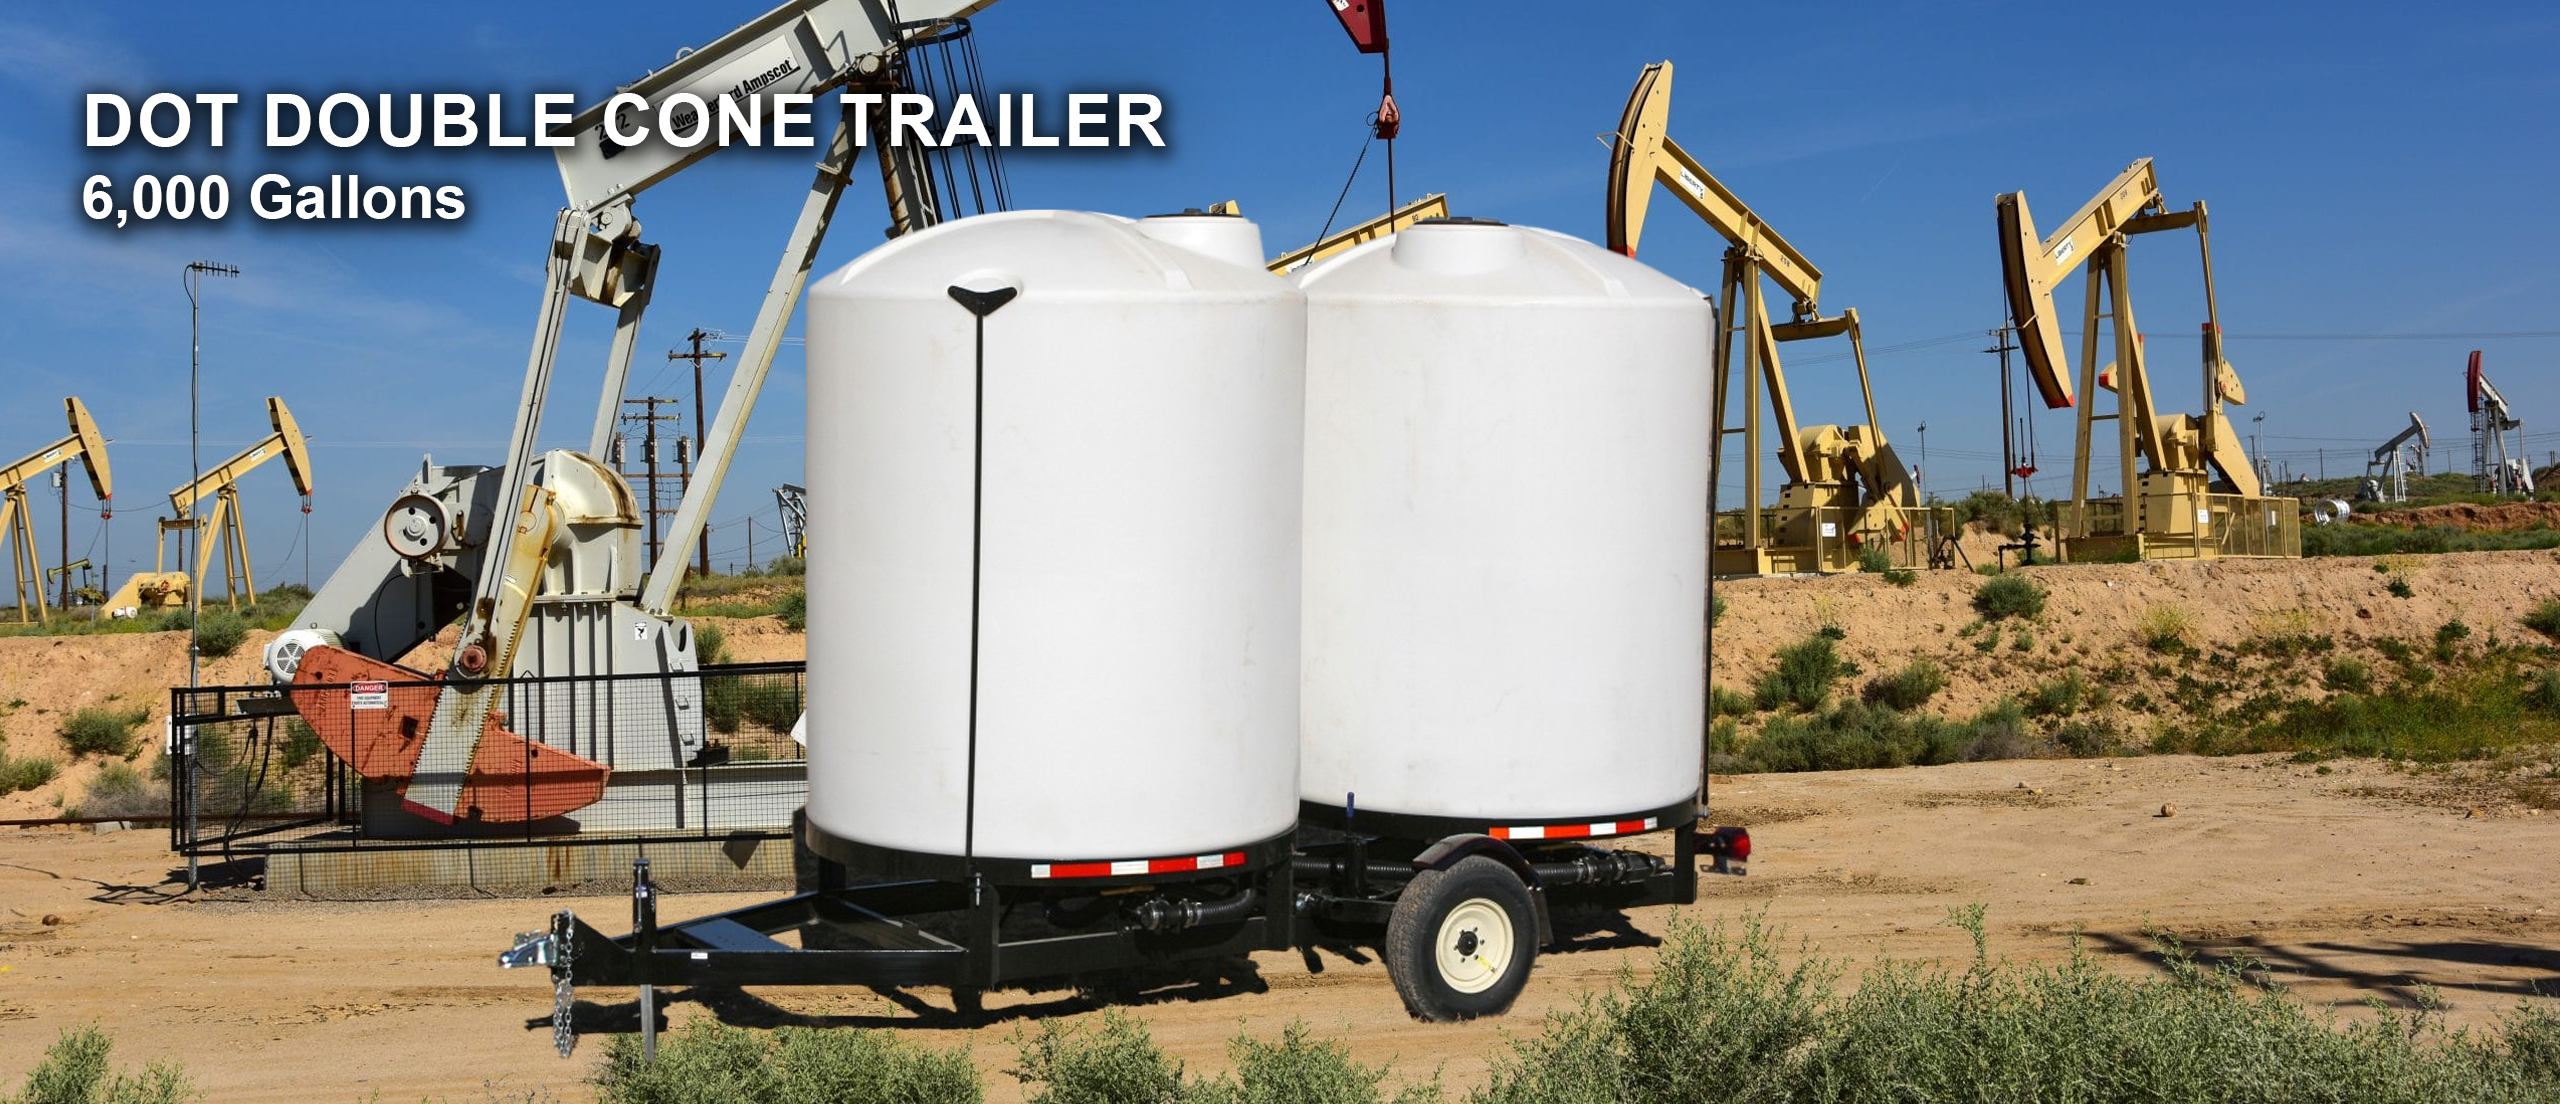 3000-double-cone-trailer-banner-2-1